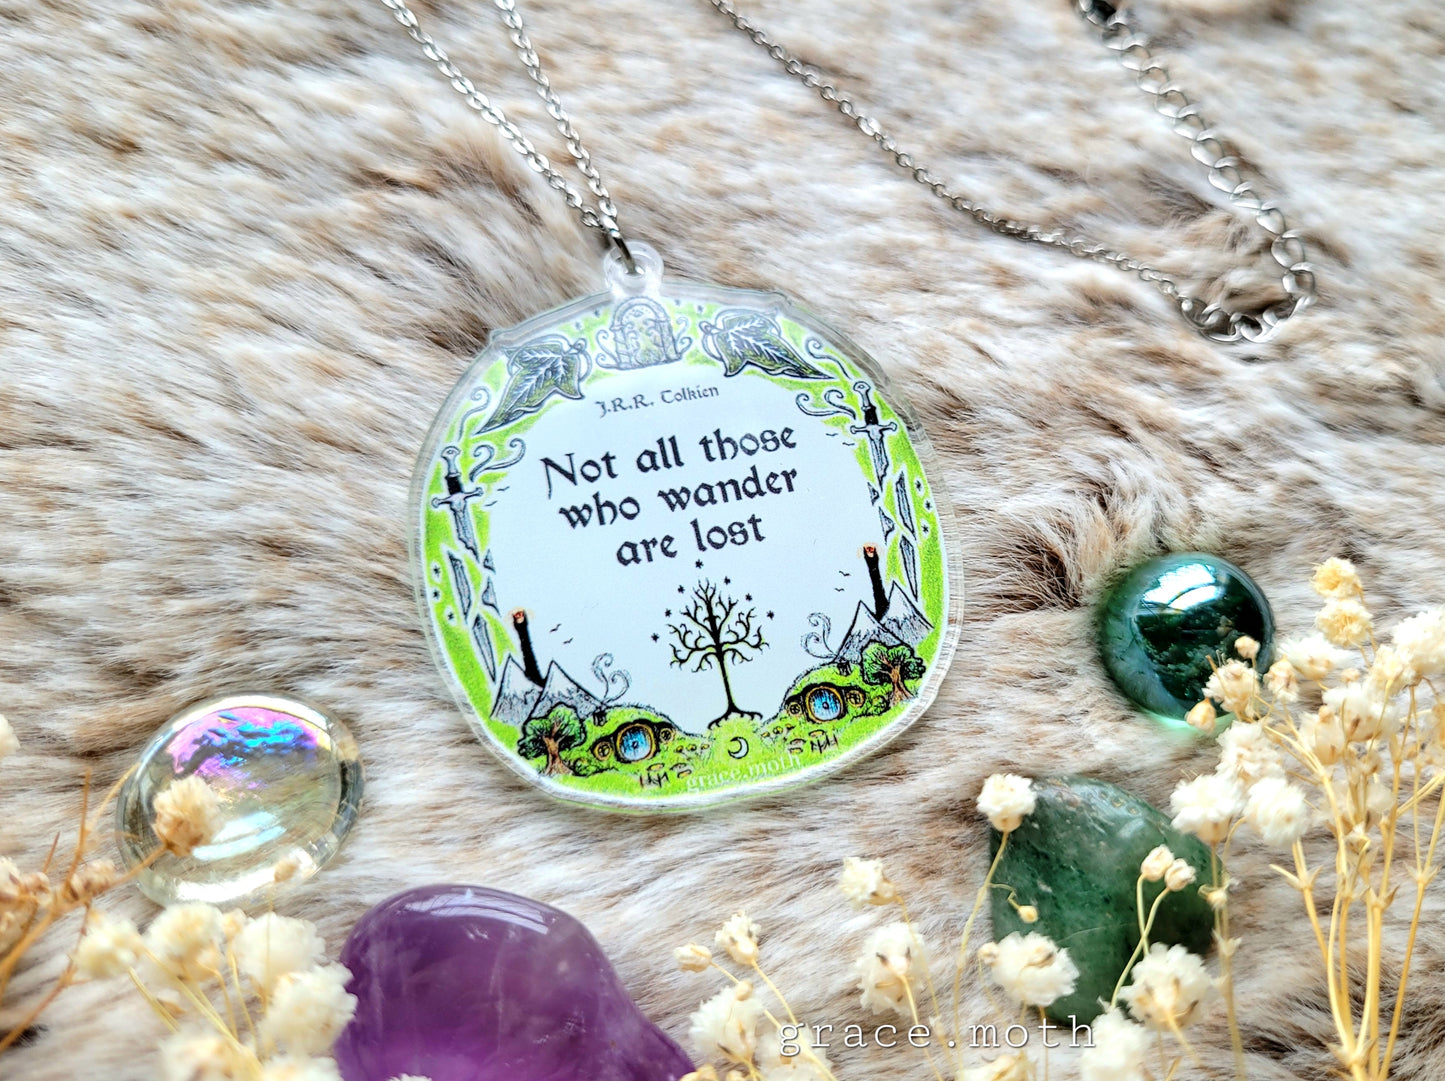 LOTR quote illustrated necklace, recycled acrylic, by Grace Moth